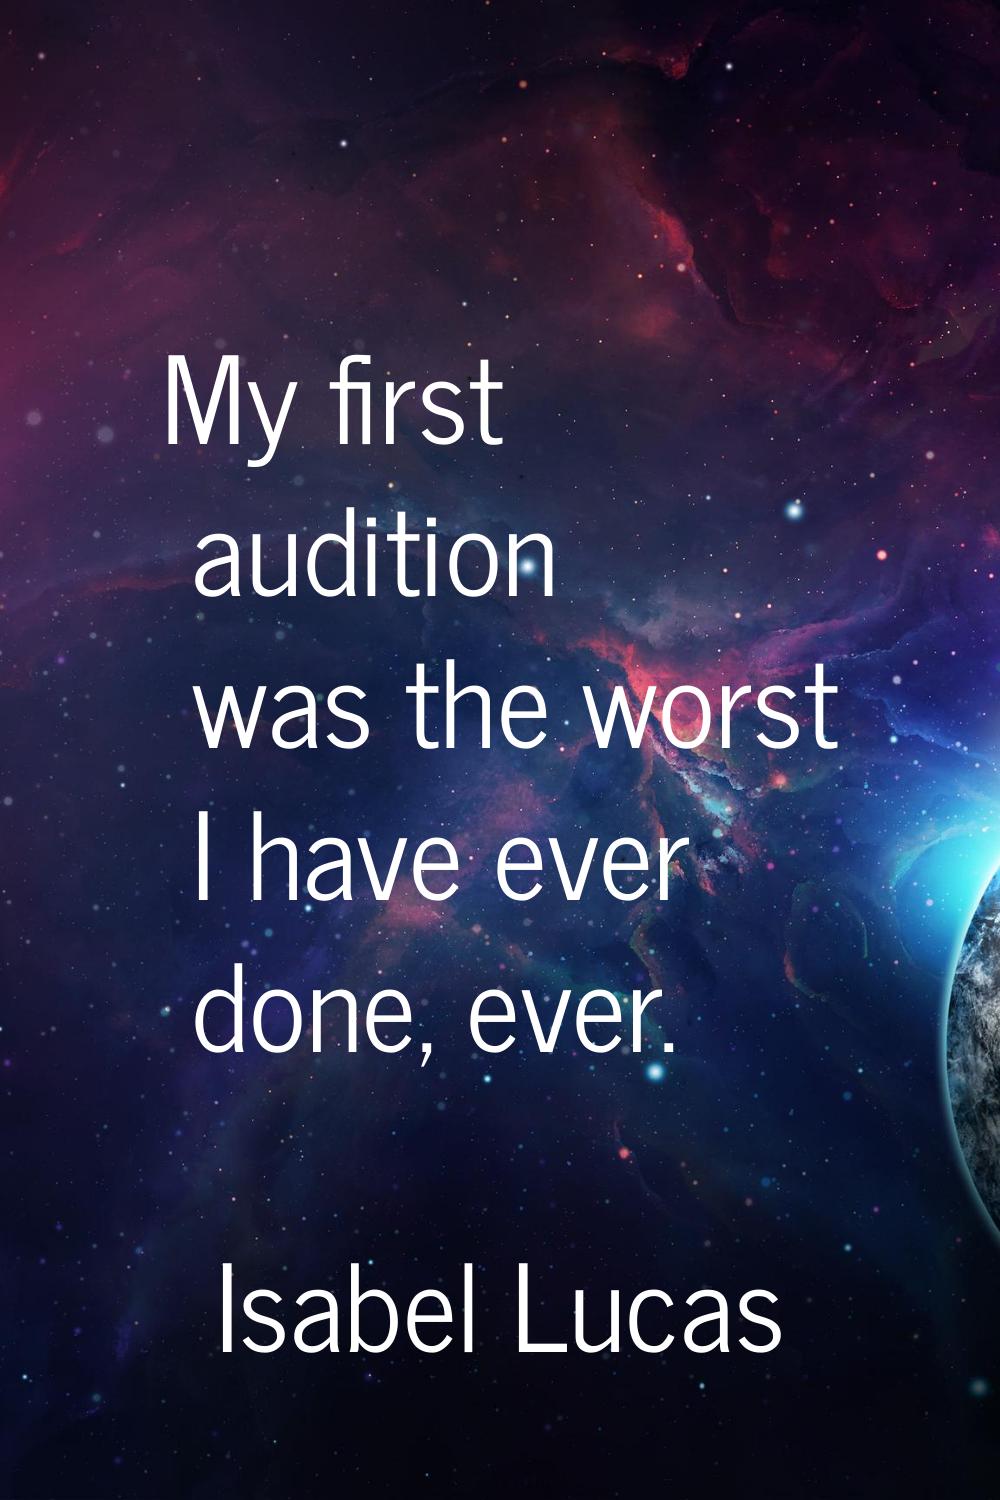 My first audition was the worst I have ever done, ever.